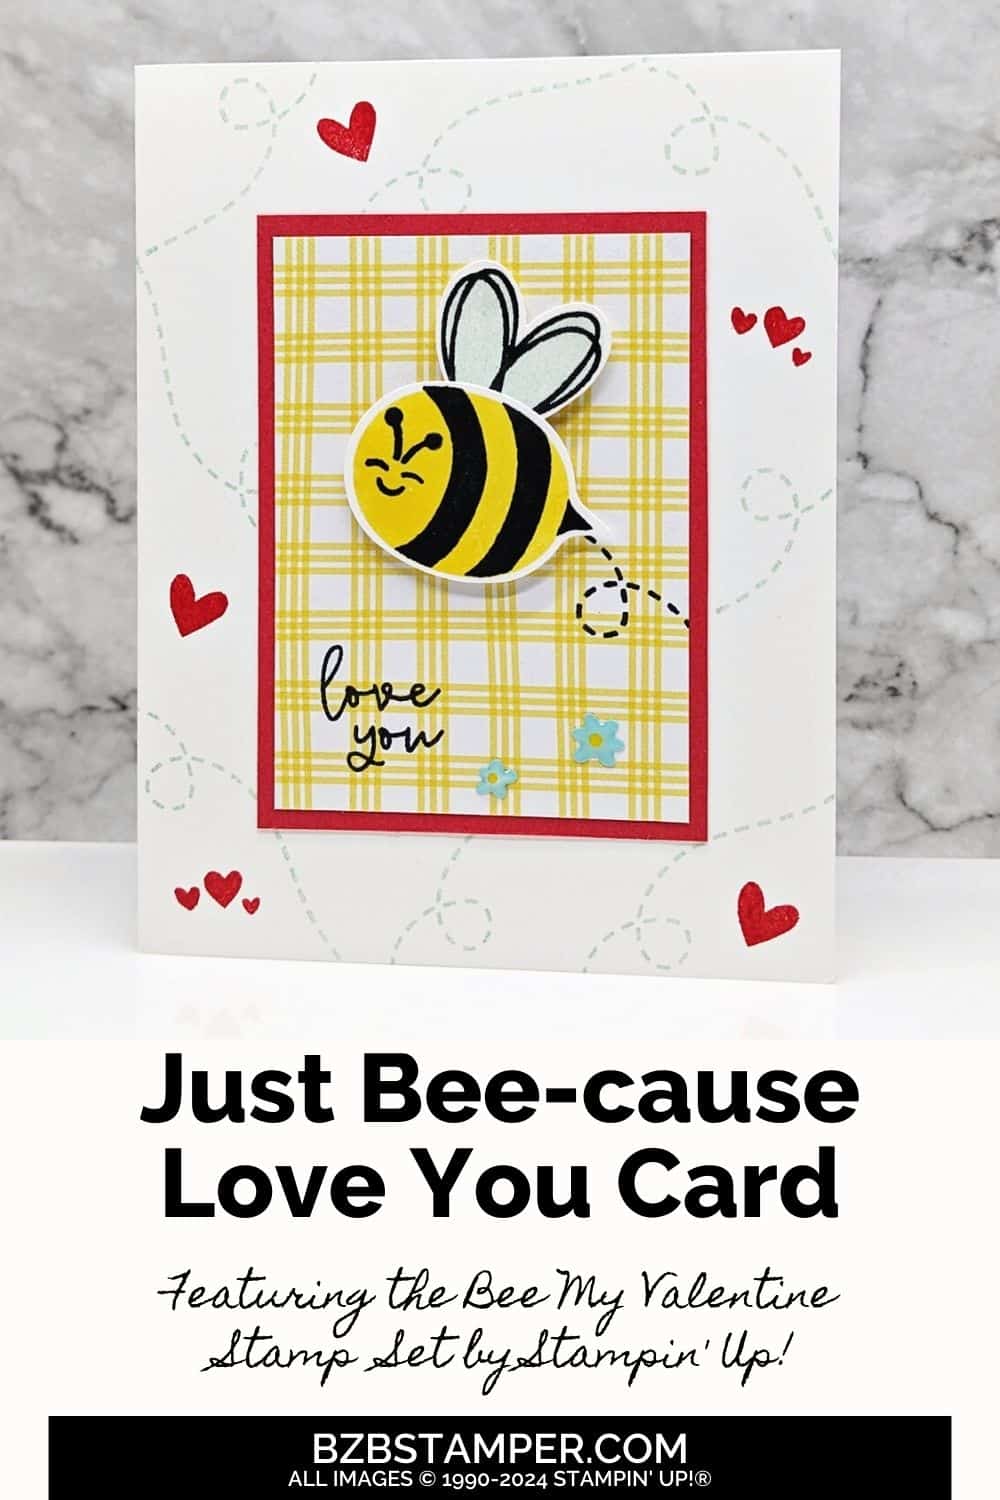 Bee My Valentine Bundle by Stampin Up featuring a bee that says "I love you" in red, blue and yellow with red hearts.